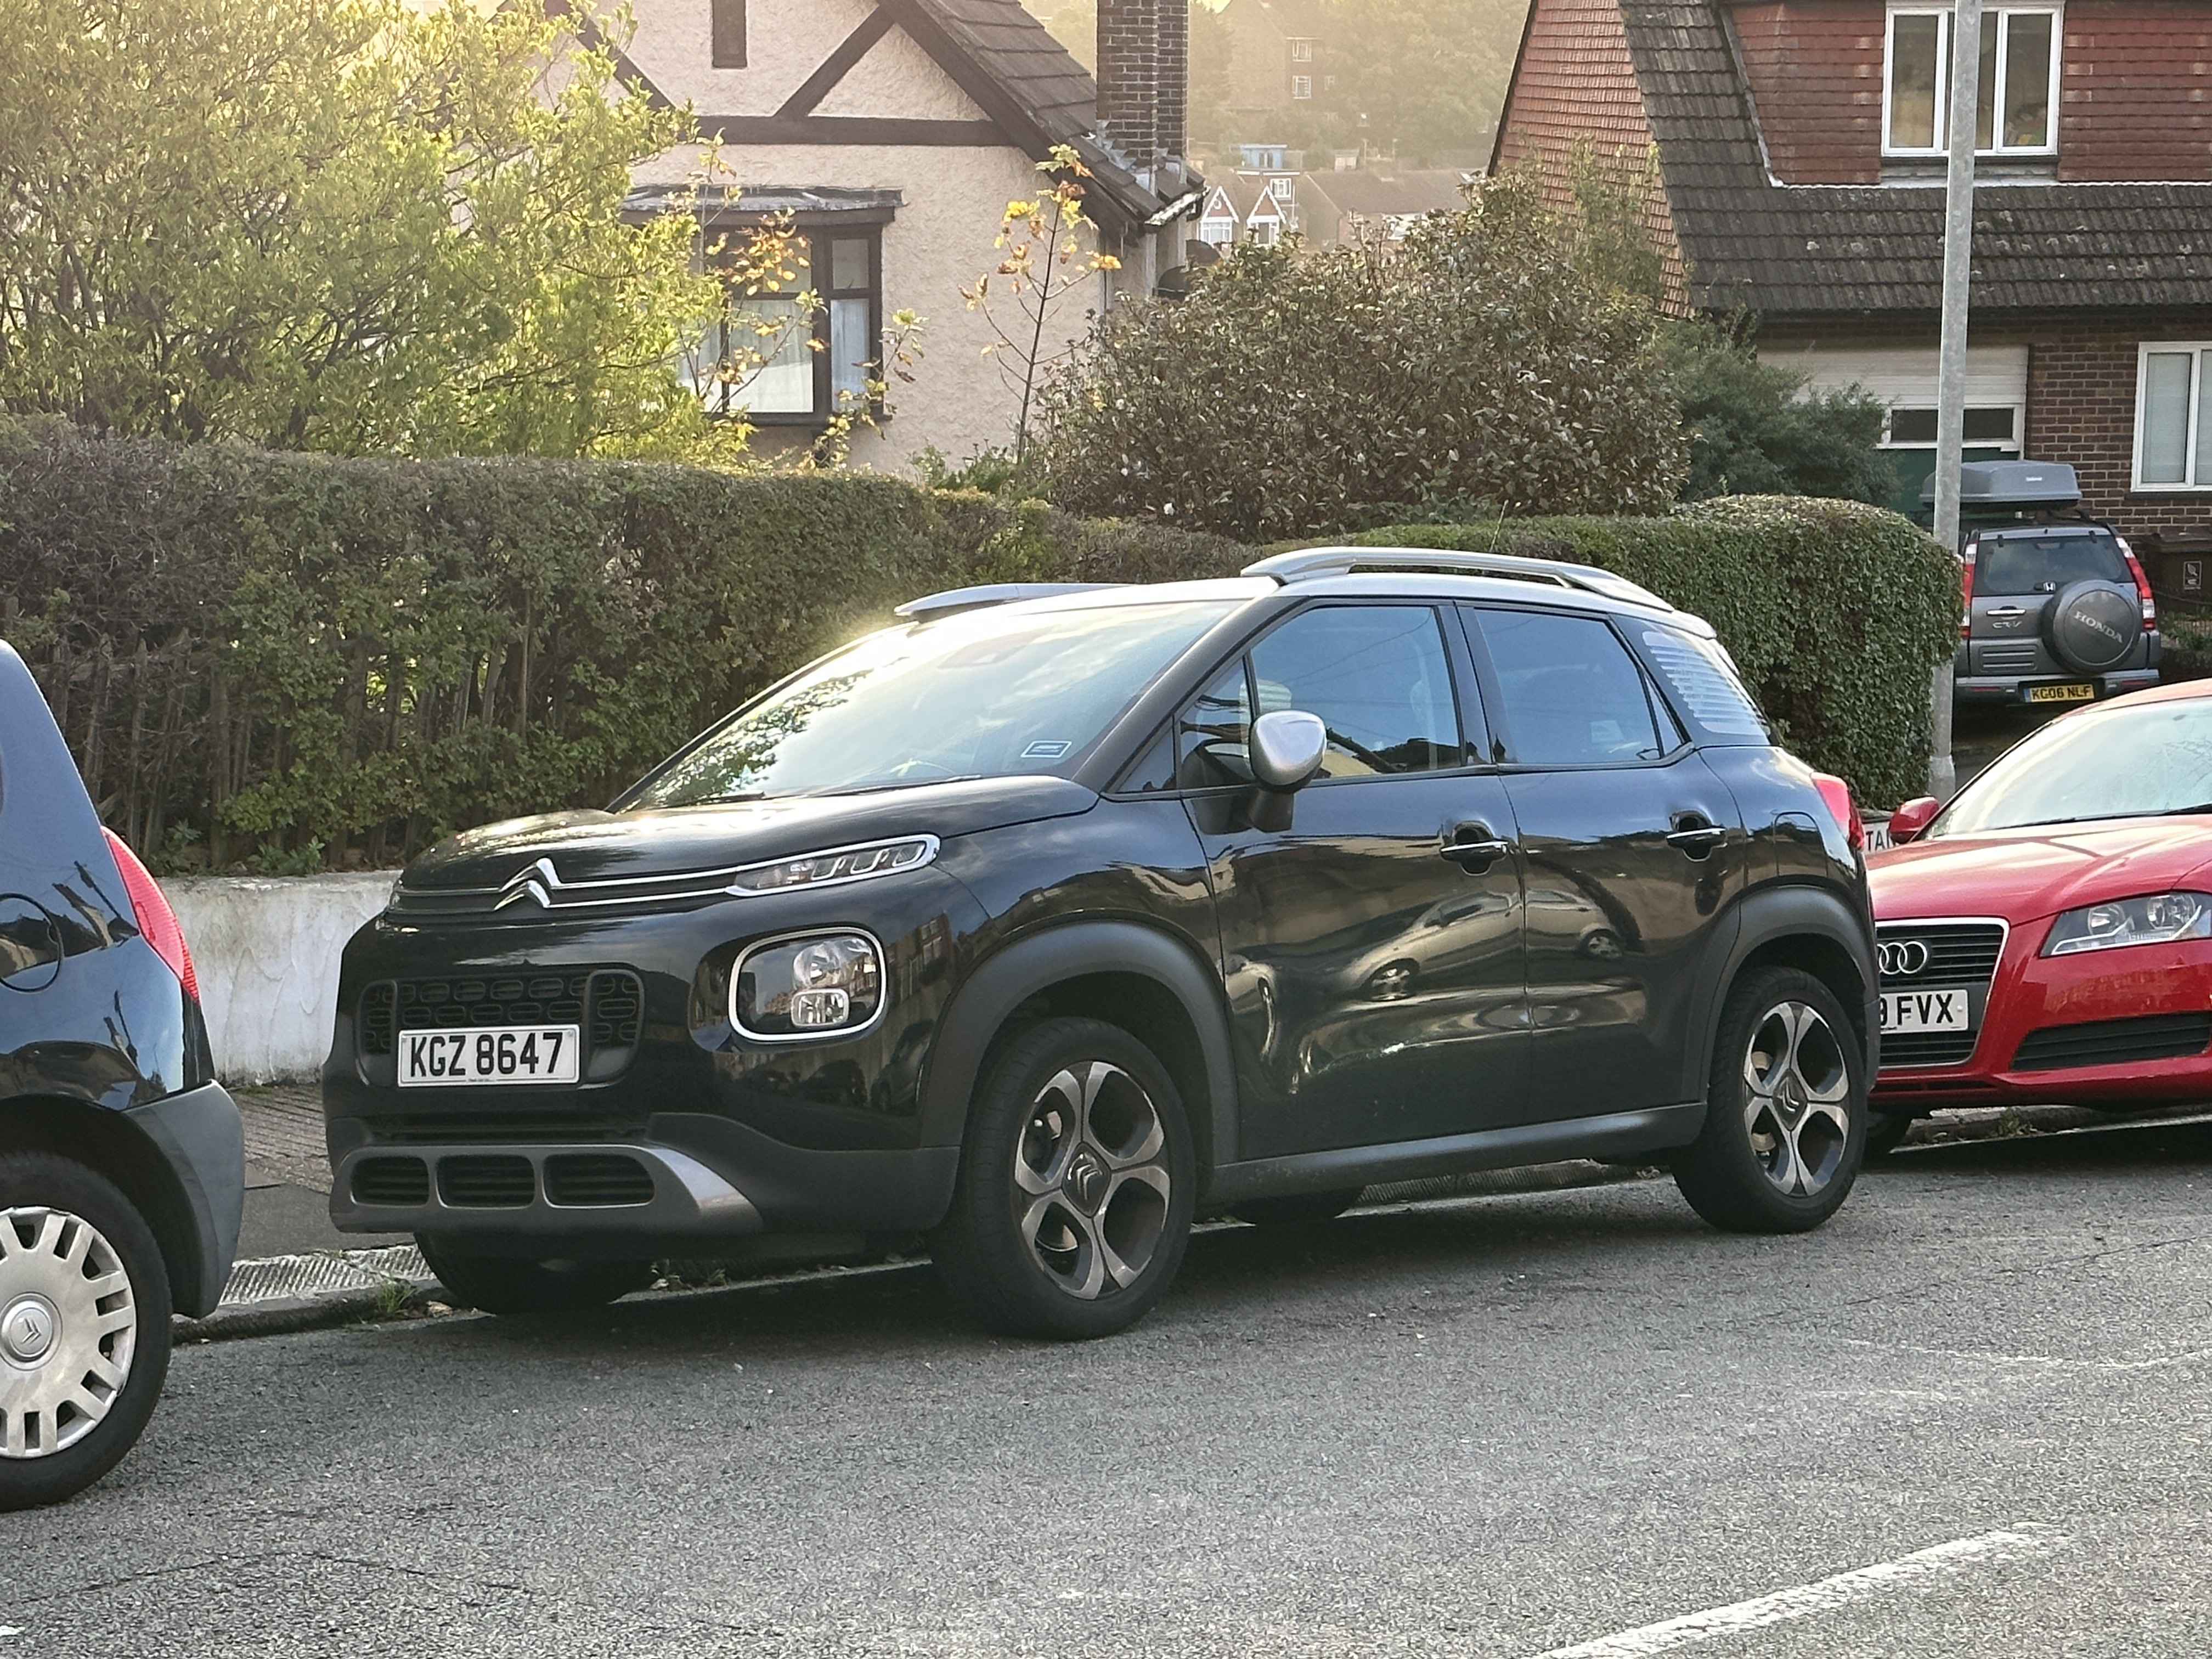 Photograph of KGZ 8647 - a Black Citroen C3 parked in Hollingdean by a non-resident who uses the local area as part of their Brighton commute. The fourth of five photographs supplied by the residents of Hollingdean.